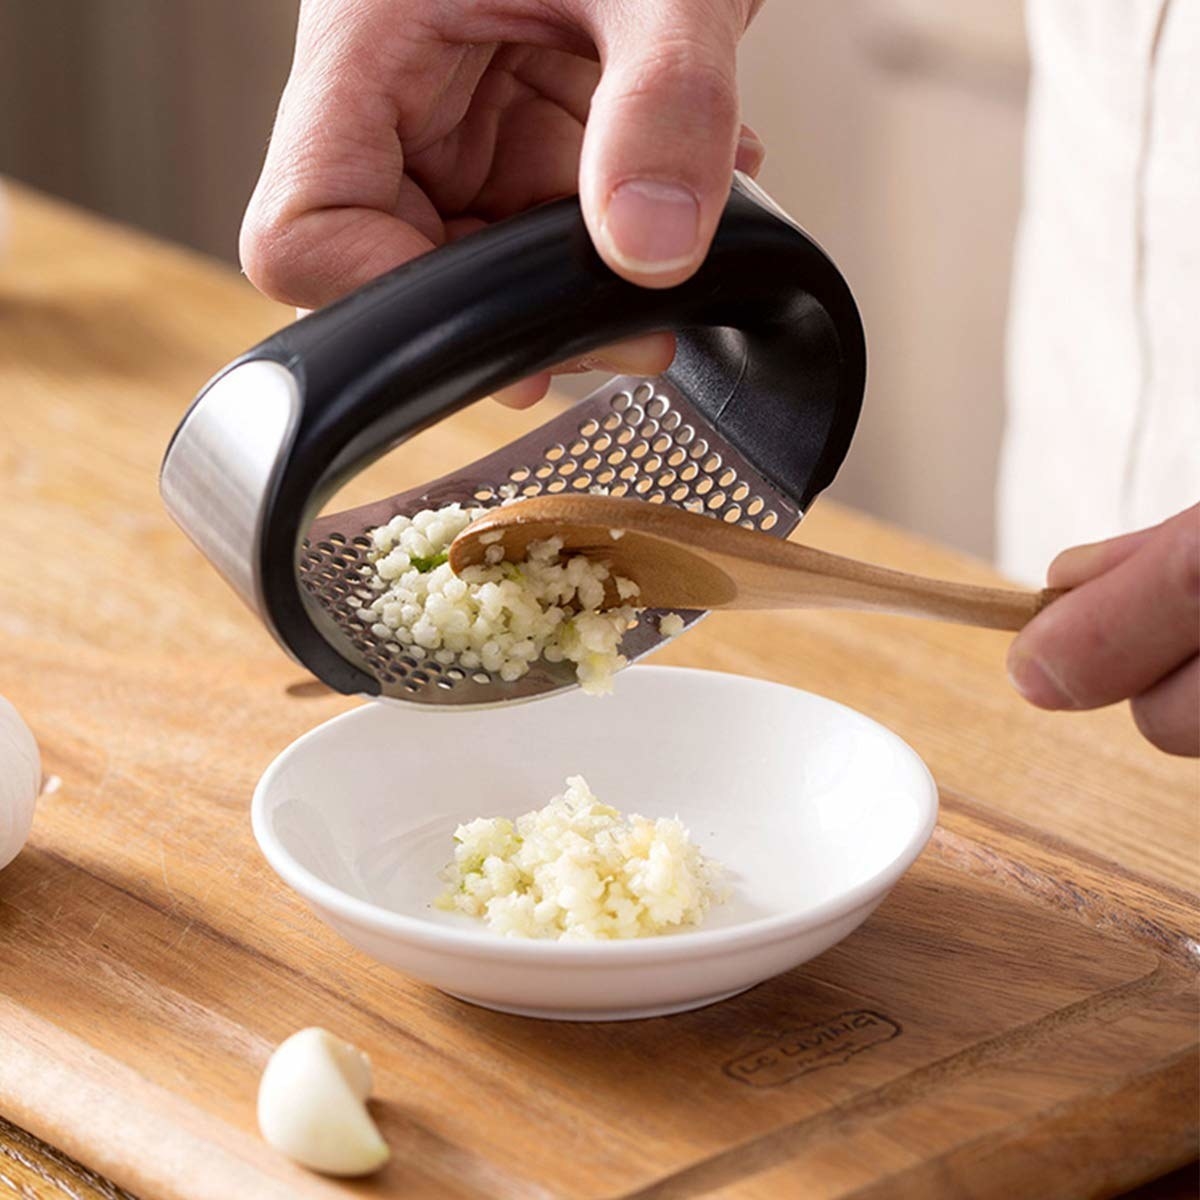 Garlic being taken out of the garlic press using a spoon